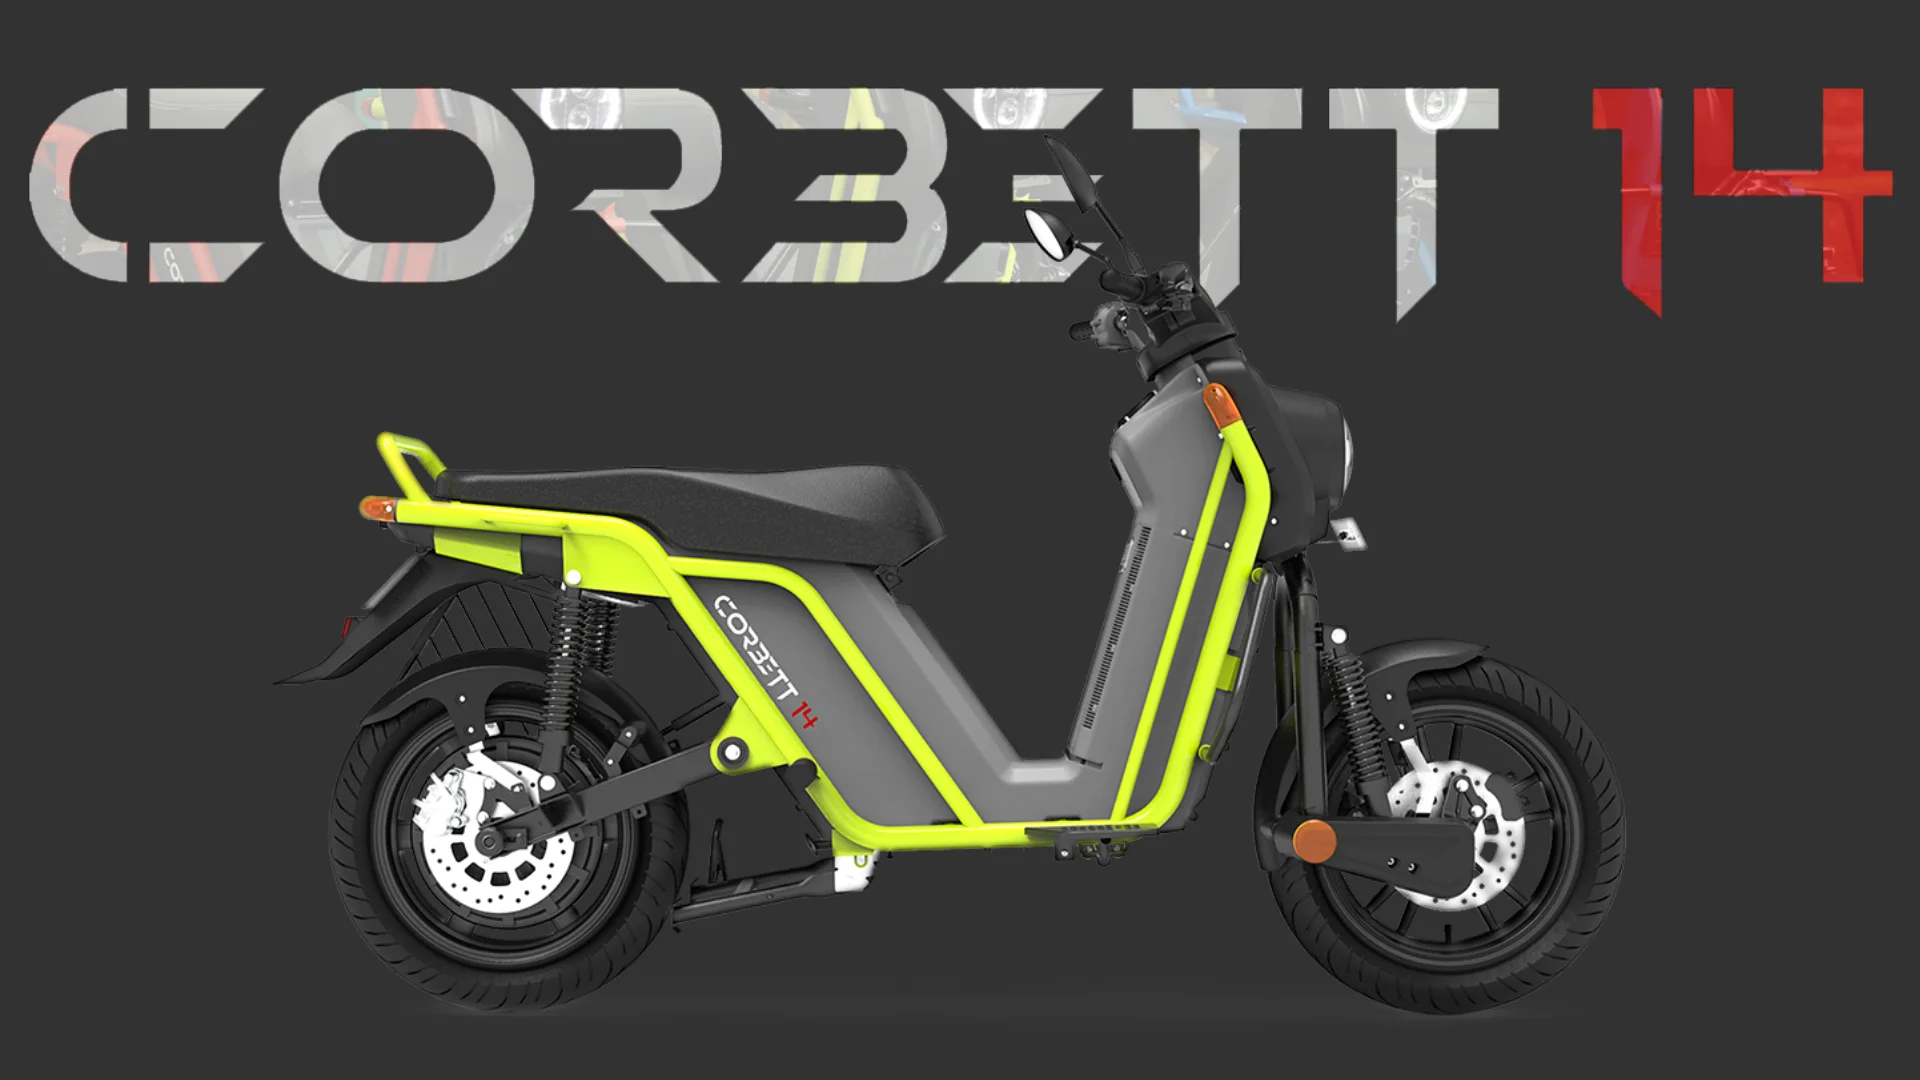 https://e-vehicleinfo.com/corbett-14-electric-scooter-price-specifications/